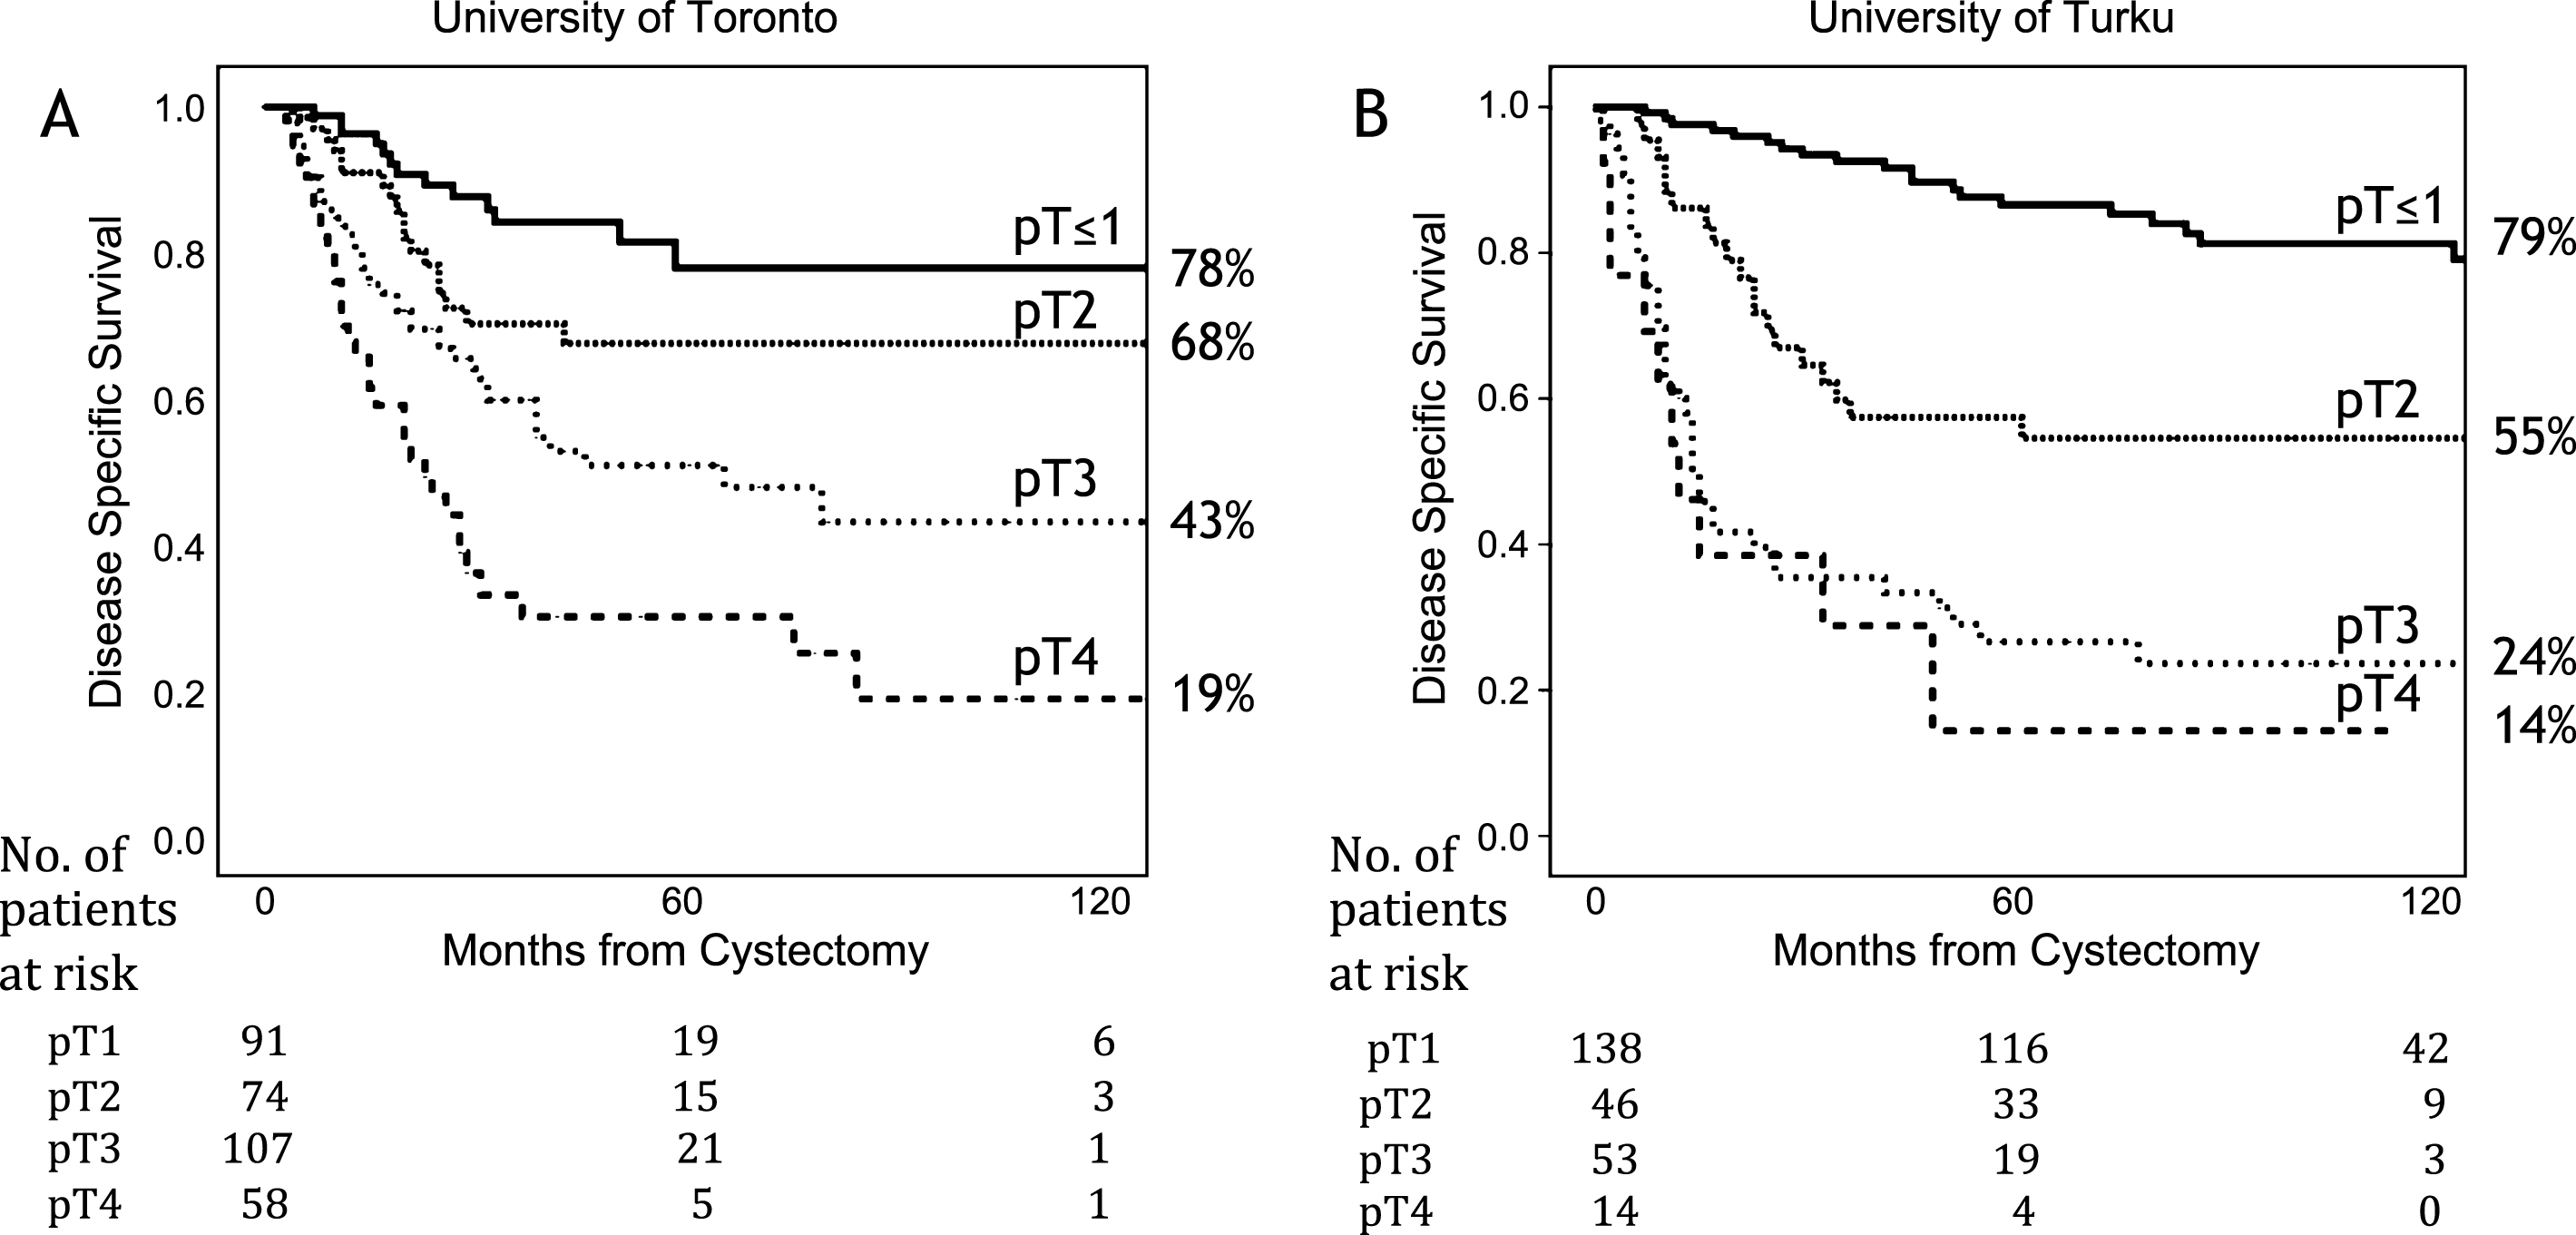 Kaplan-Meier analysis for disease specific survival for the University of Toronto (A) and the University of Turku (B).